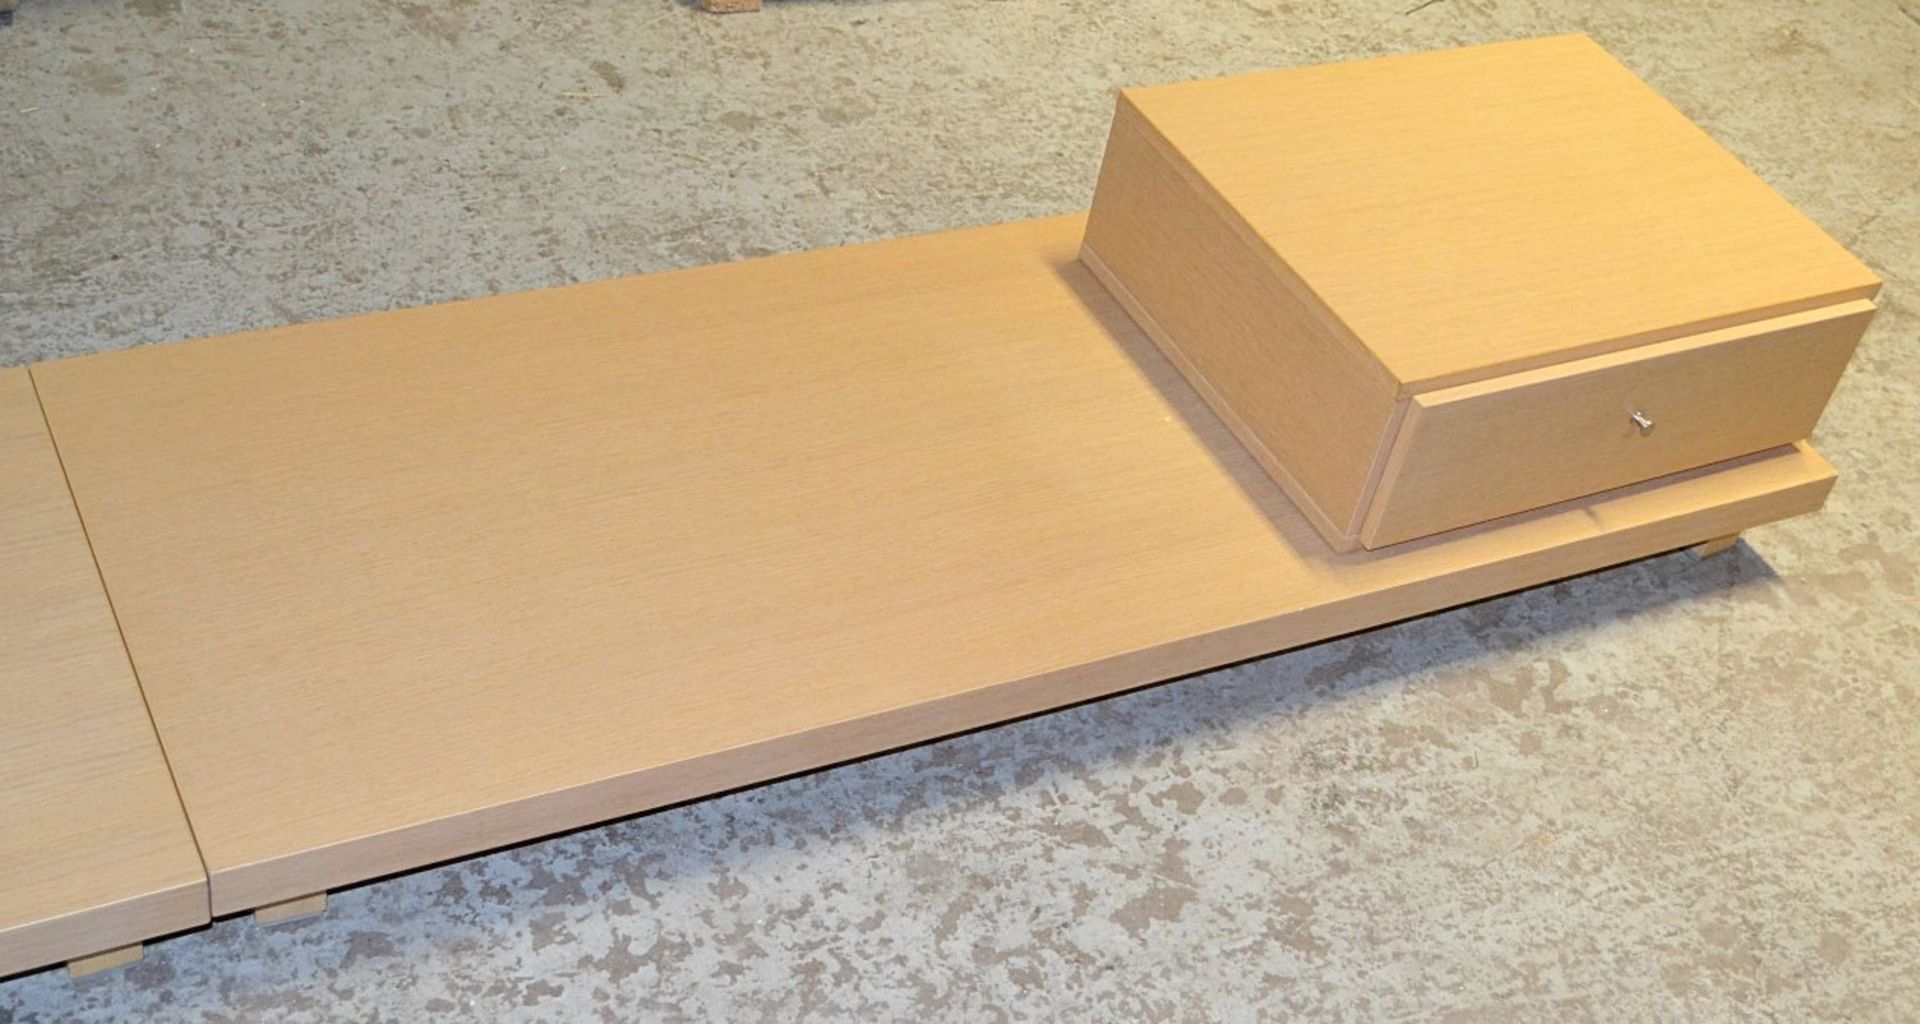 2 x Bedside Cabinets On Underbed Plinth With A Classic Oak Finish - 3 Metres Wide  - Used In Good - Image 8 of 8